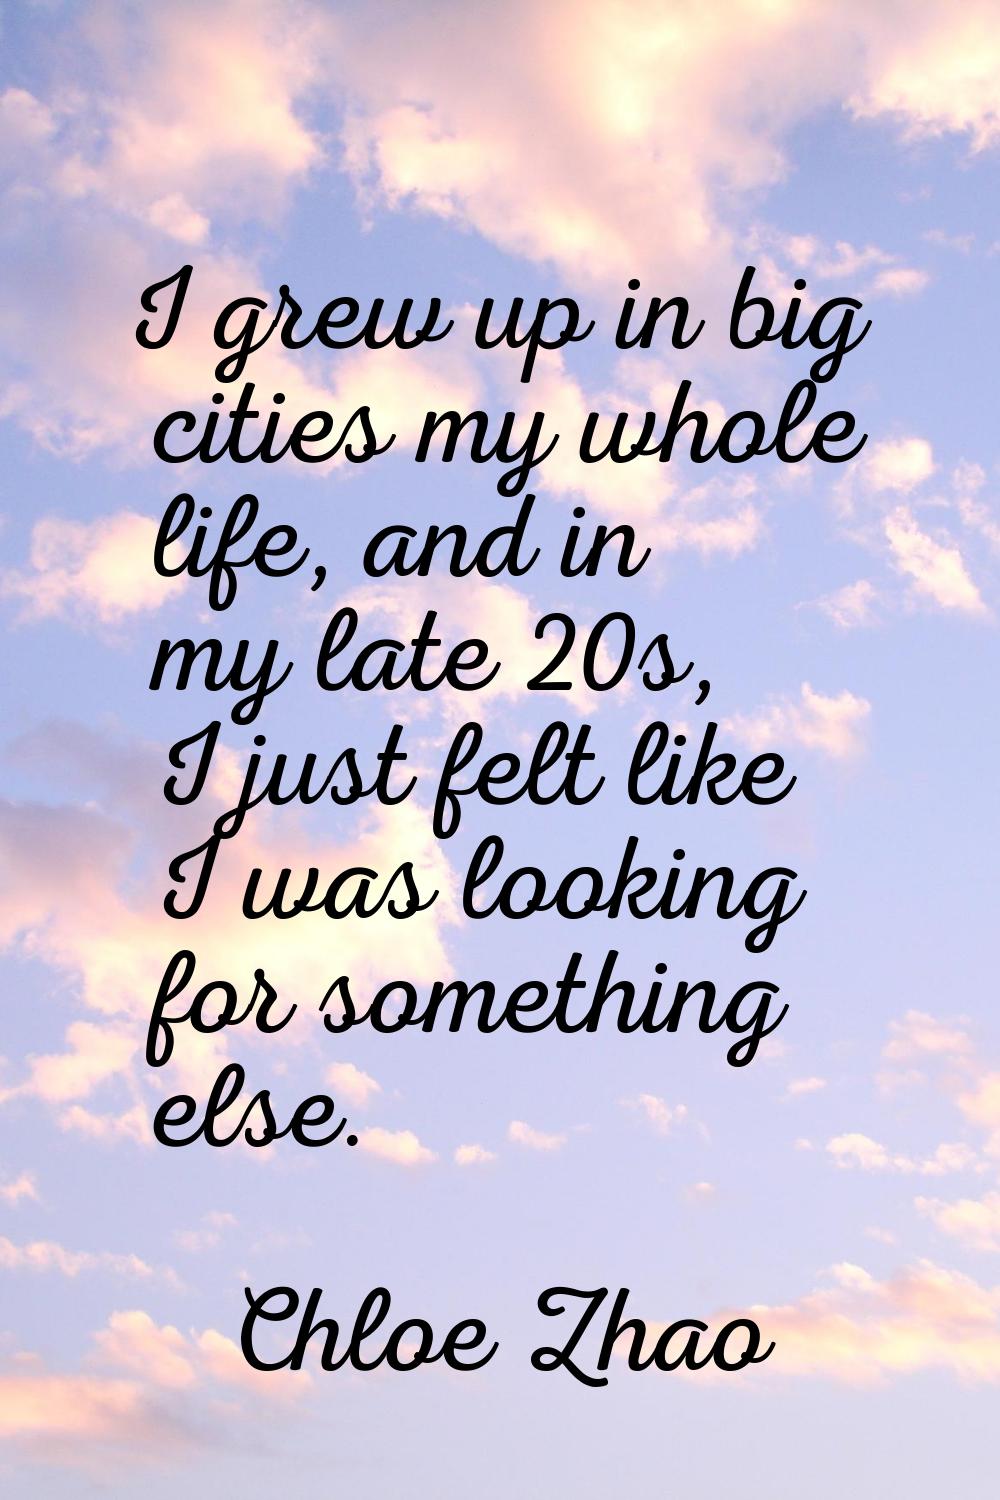 I grew up in big cities my whole life, and in my late 20s, I just felt like I was looking for somet